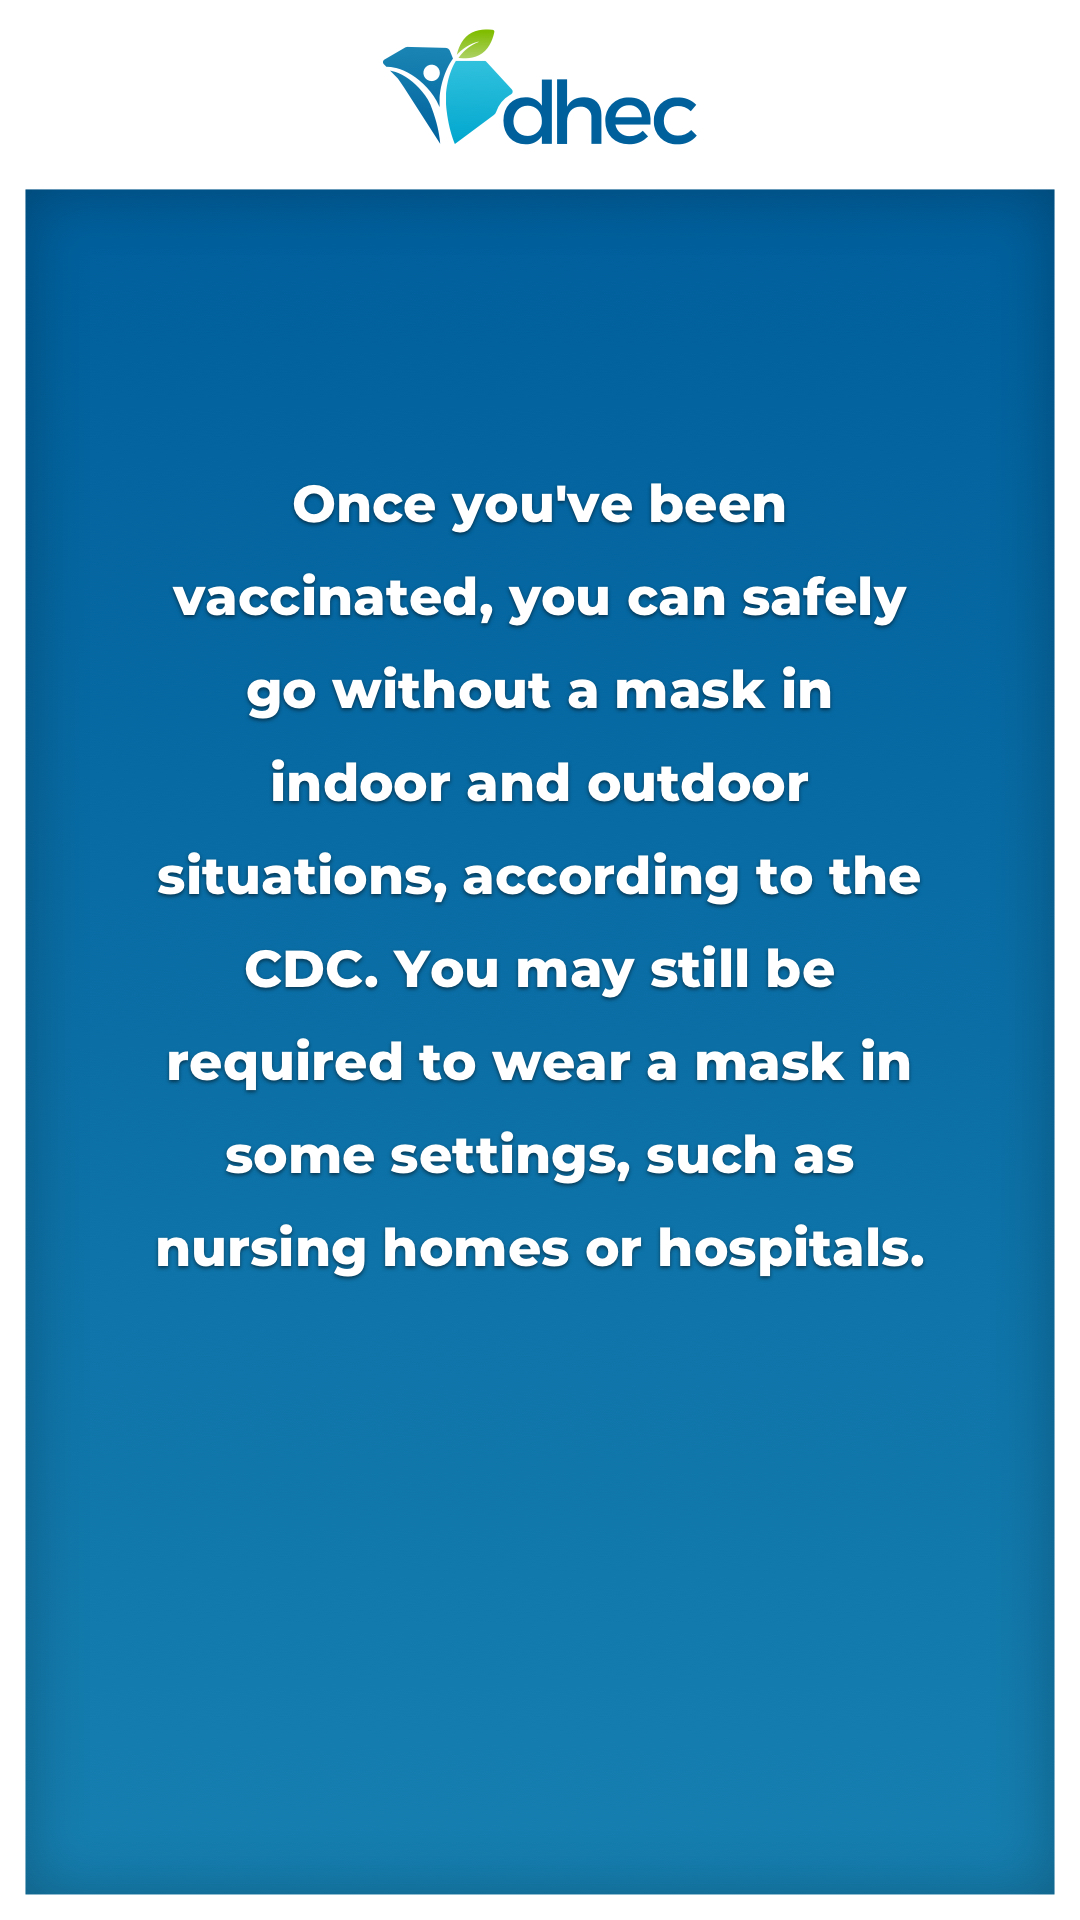 Once you've been vaccinated, you can safely go without a mask in indoor and outdoor